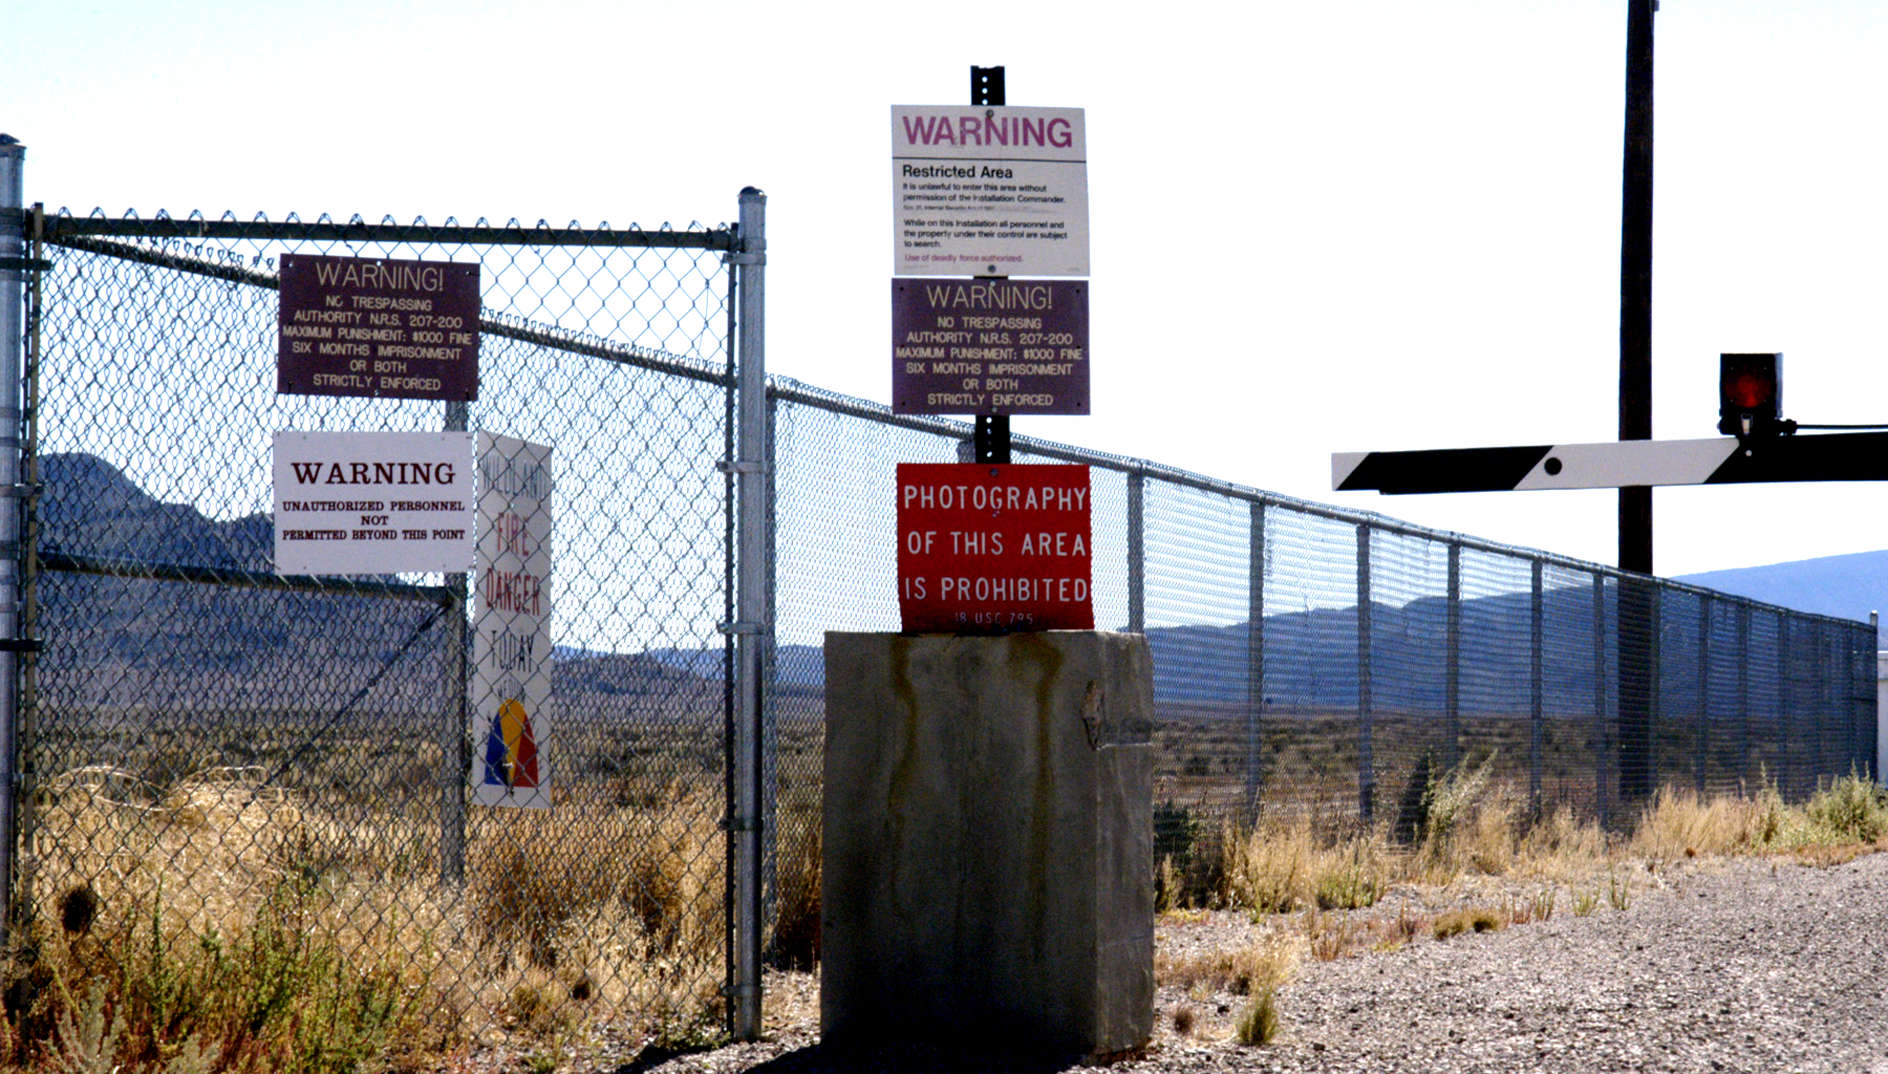 Former CIA Specialist Exposes Secrets About Area 51, Including Its Real Name